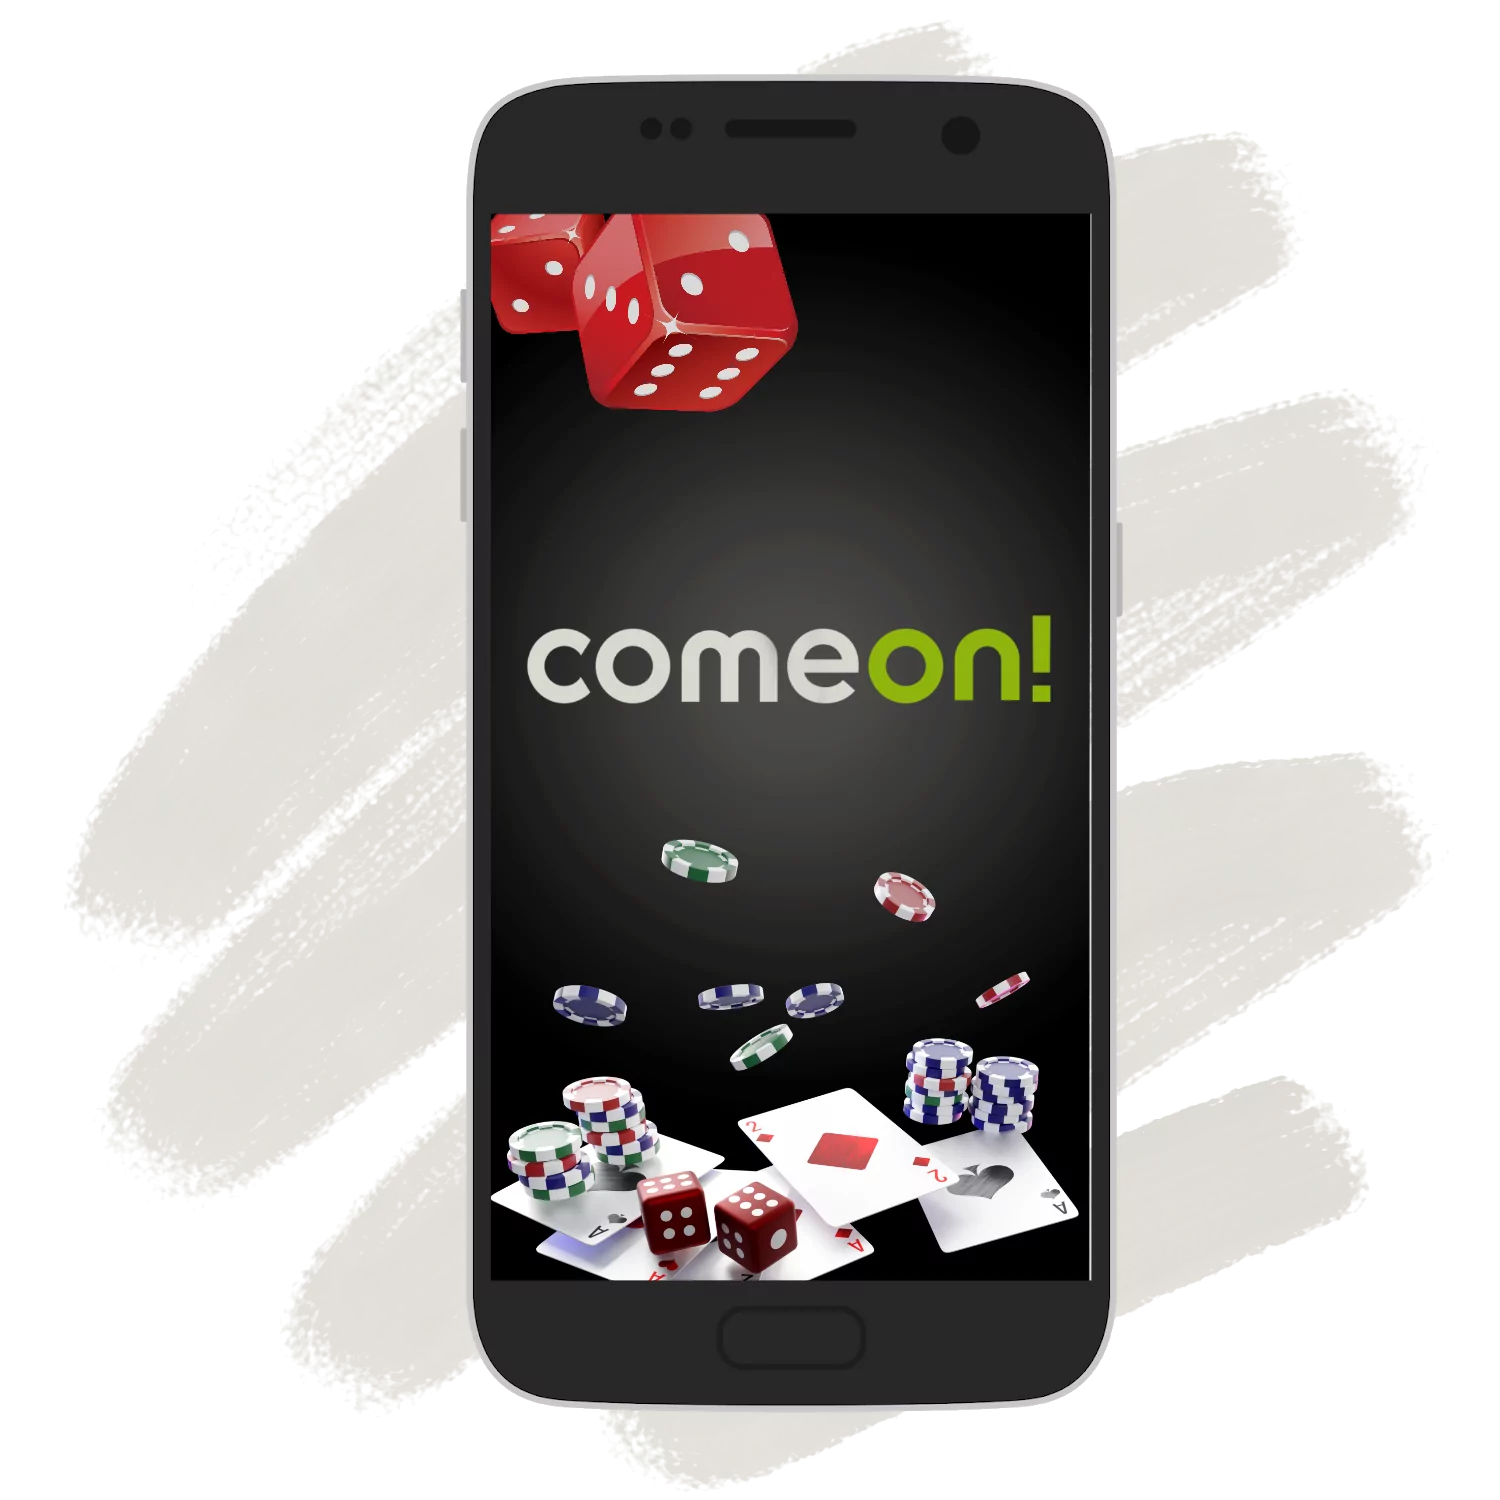 Download ComeOn app on your Android or iOS phone and start mobile betting.